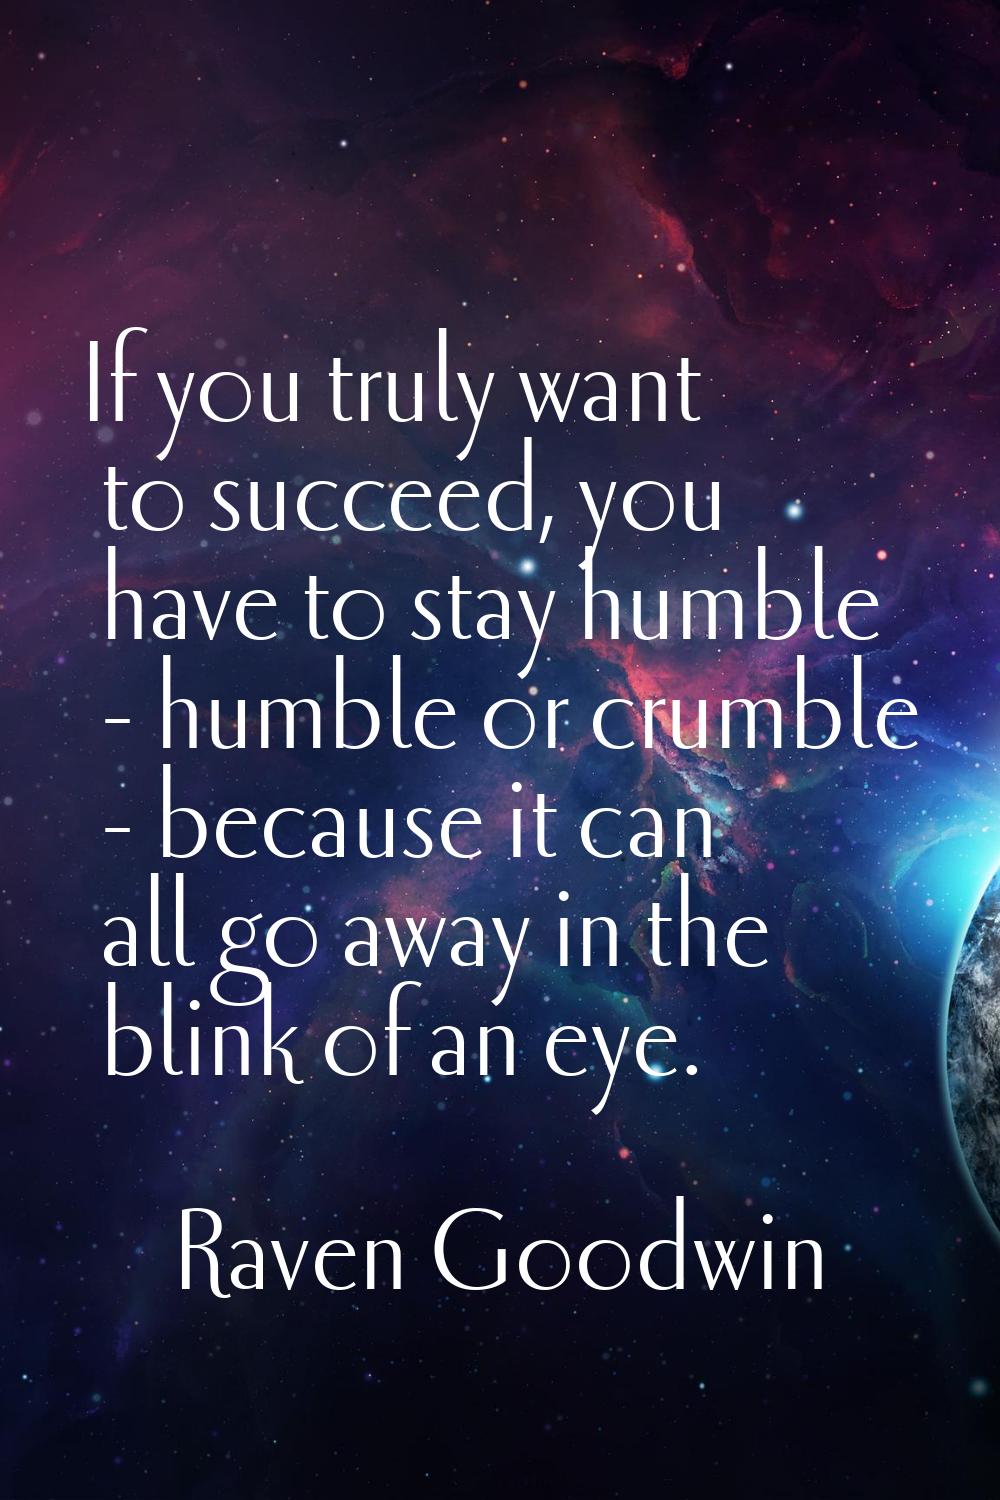 If you truly want to succeed, you have to stay humble - humble or crumble - because it can all go a